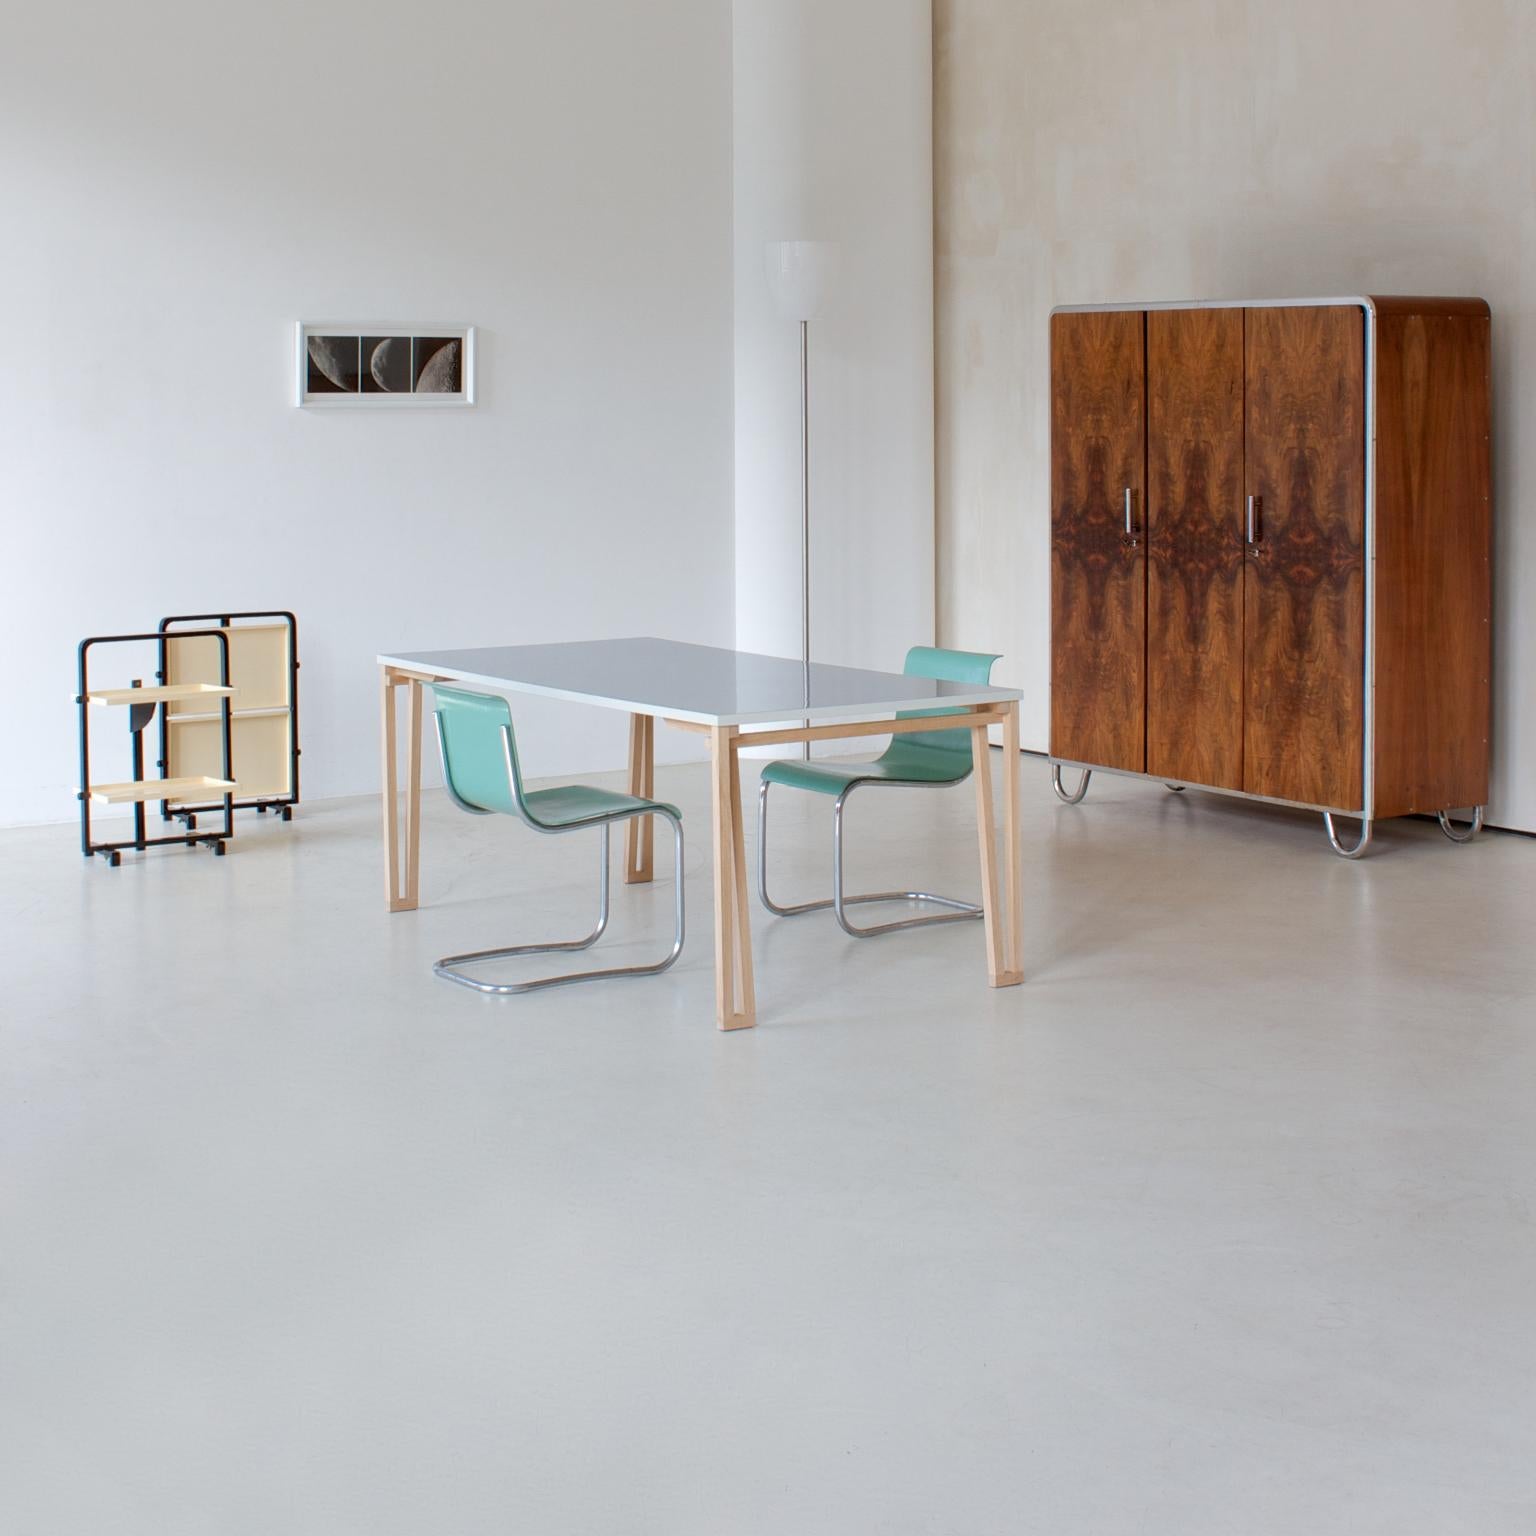 Hand-Crafted Modern Contemporary Handcrafted Wooden Table, Customisable, by GMD Berlin, 2014 For Sale